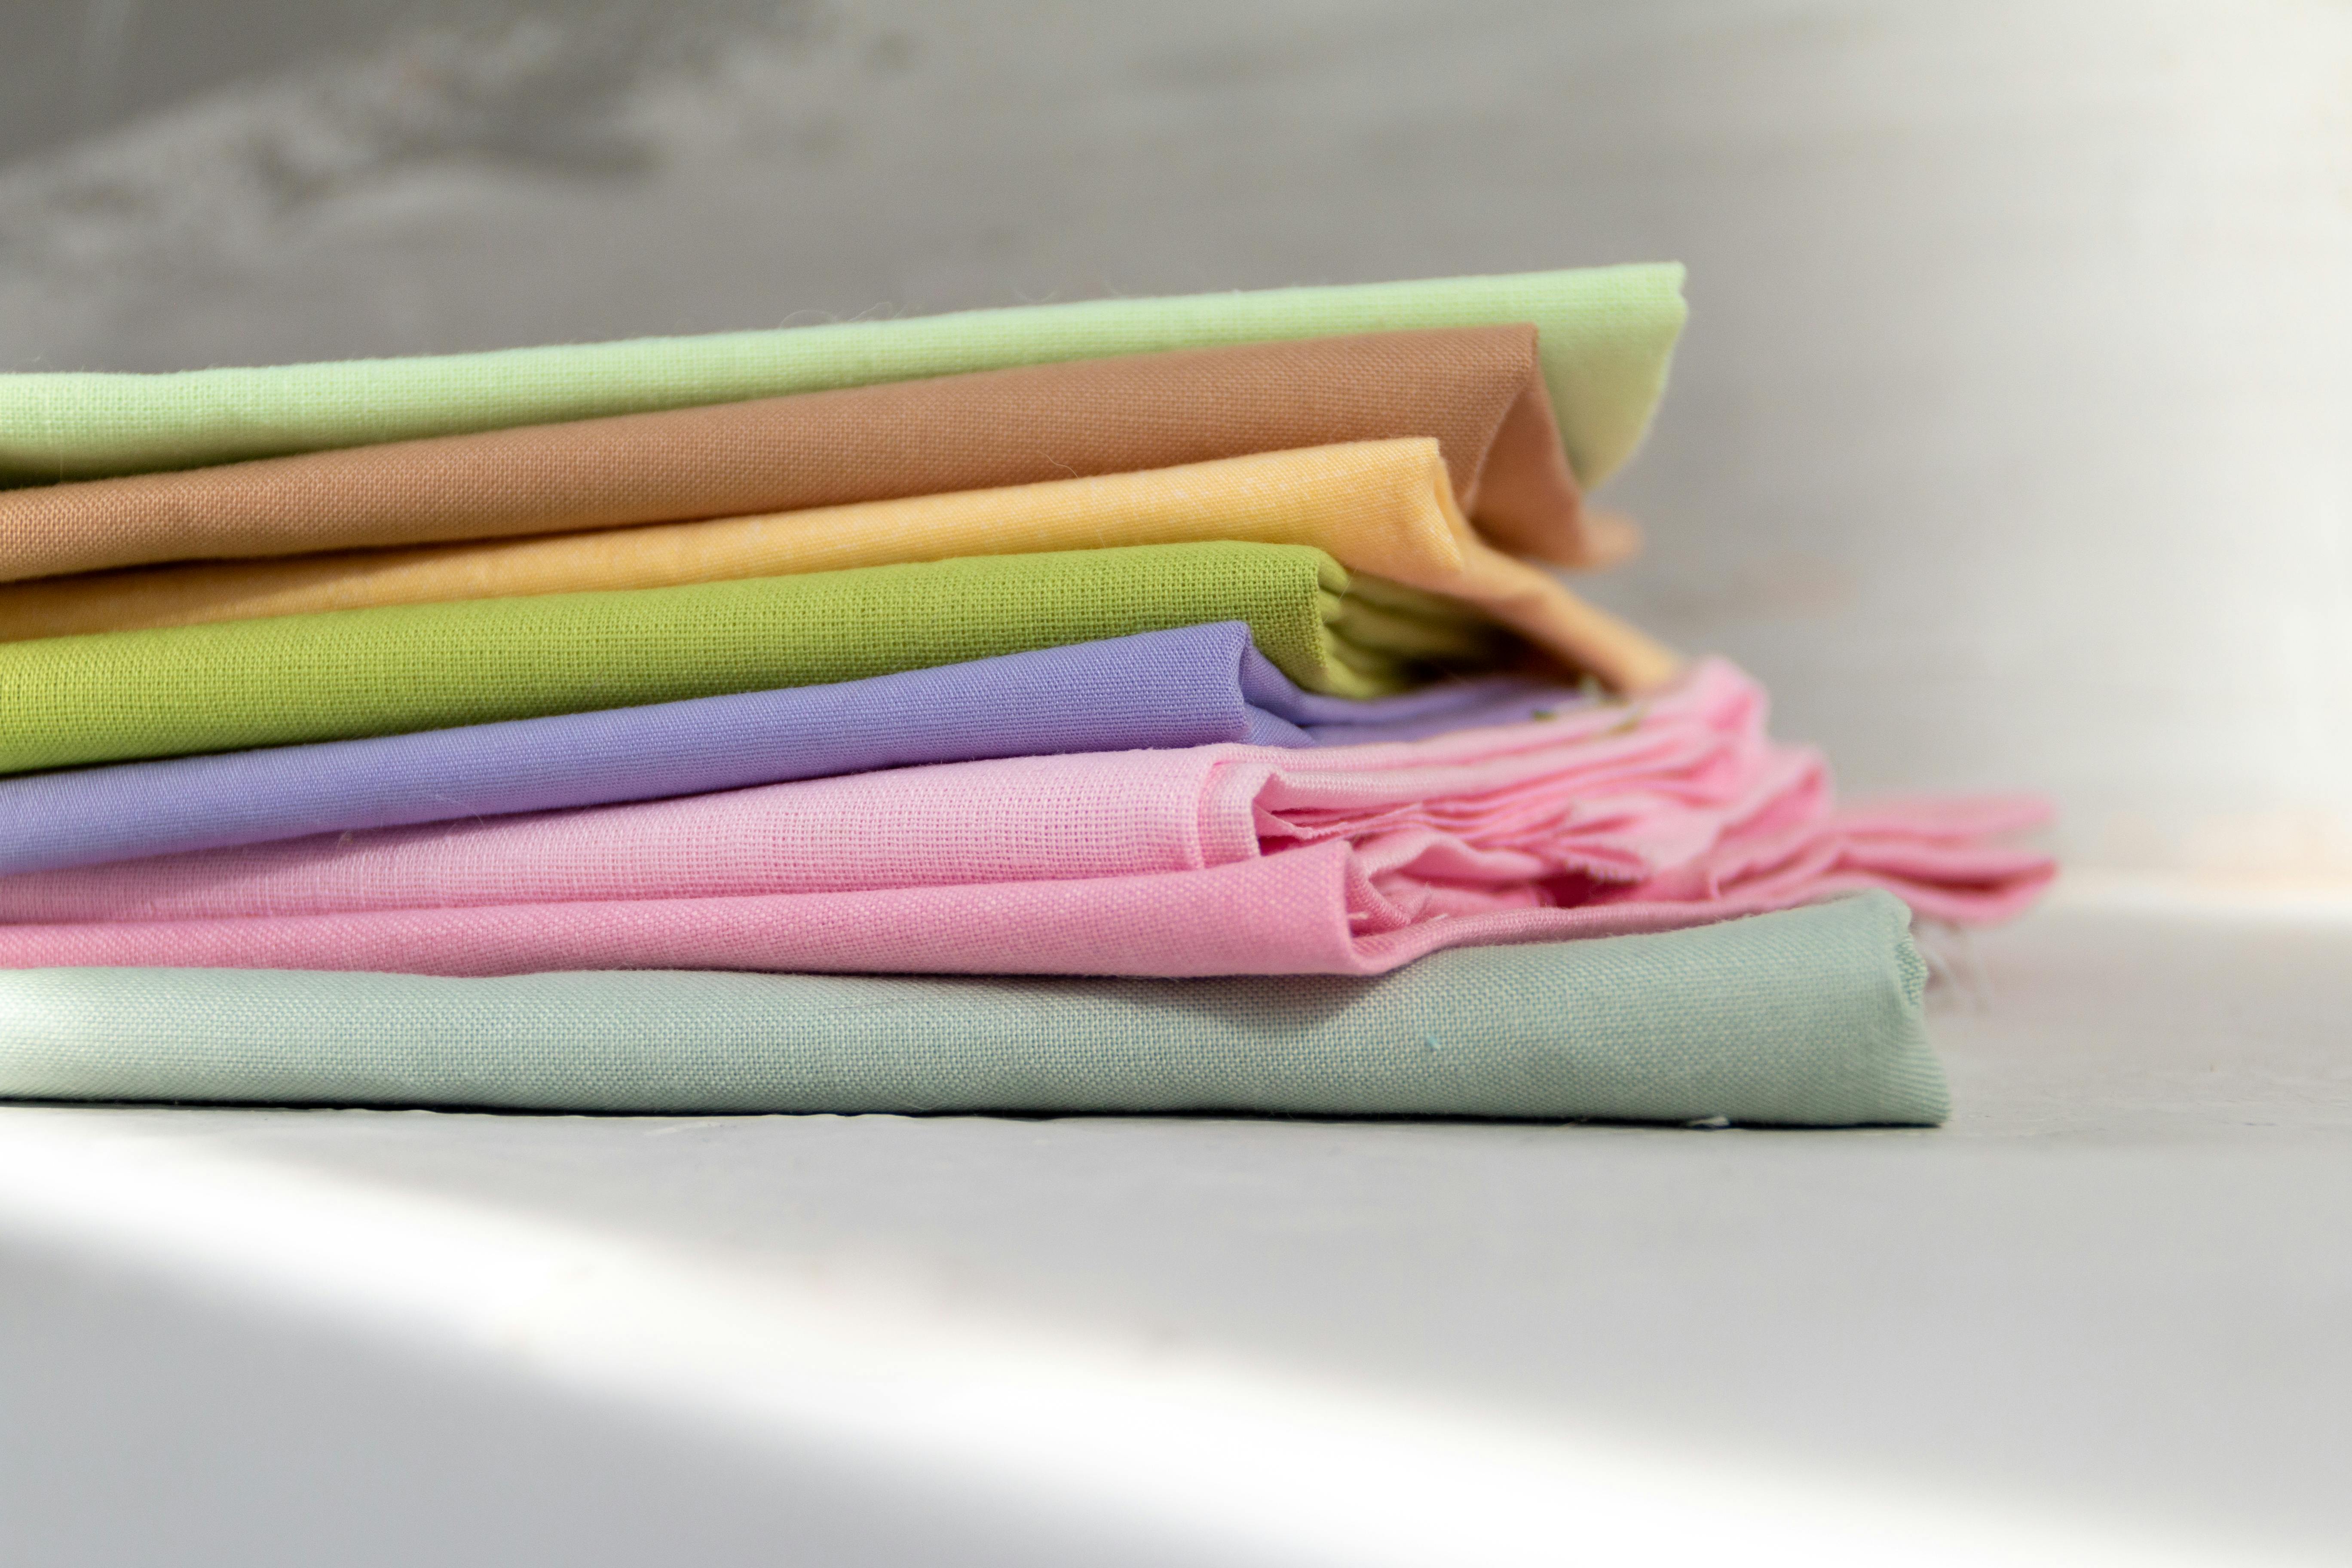  stack of colorful cotton fabrics folded on a table